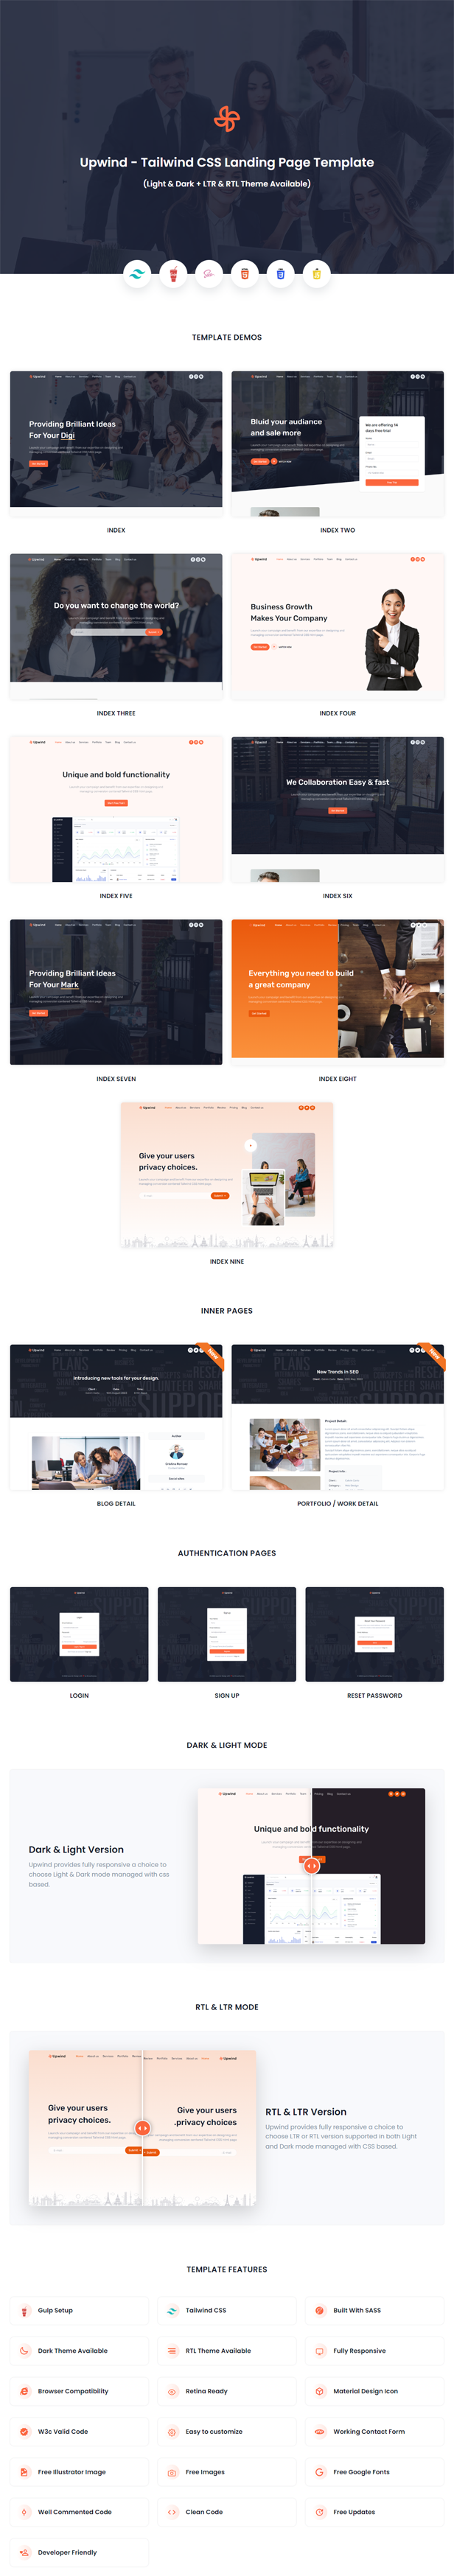 Upwind - Tailwind css Landing Page Template - 1